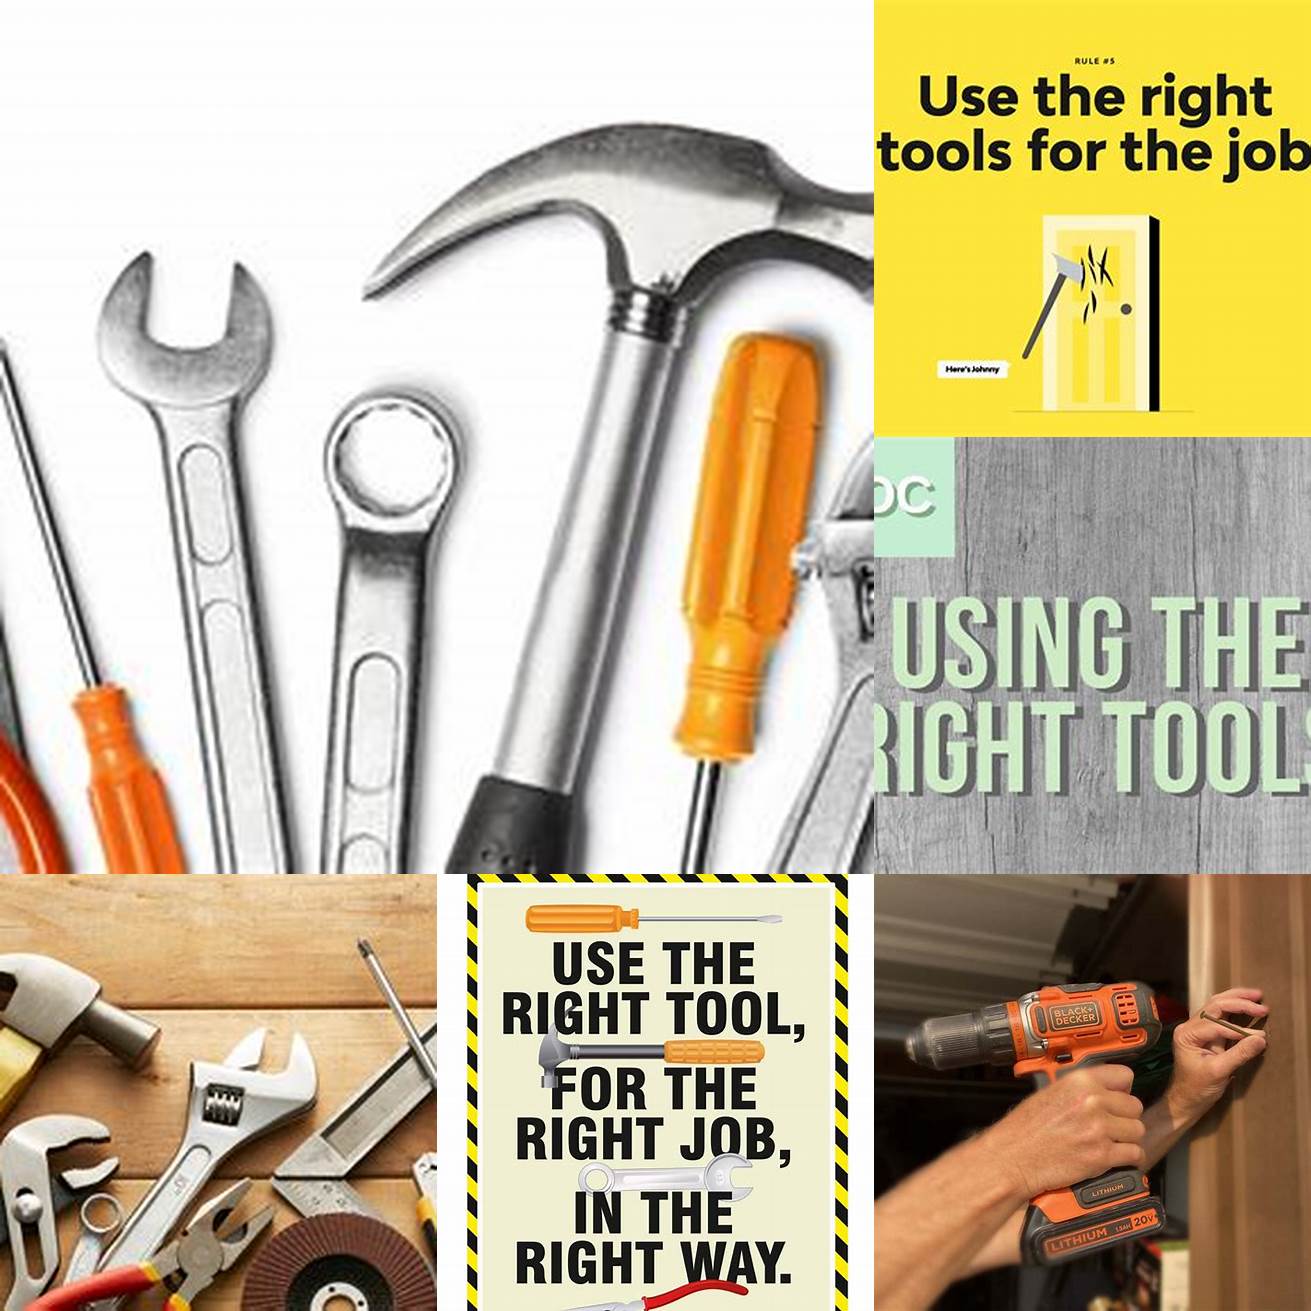 Use the right tools